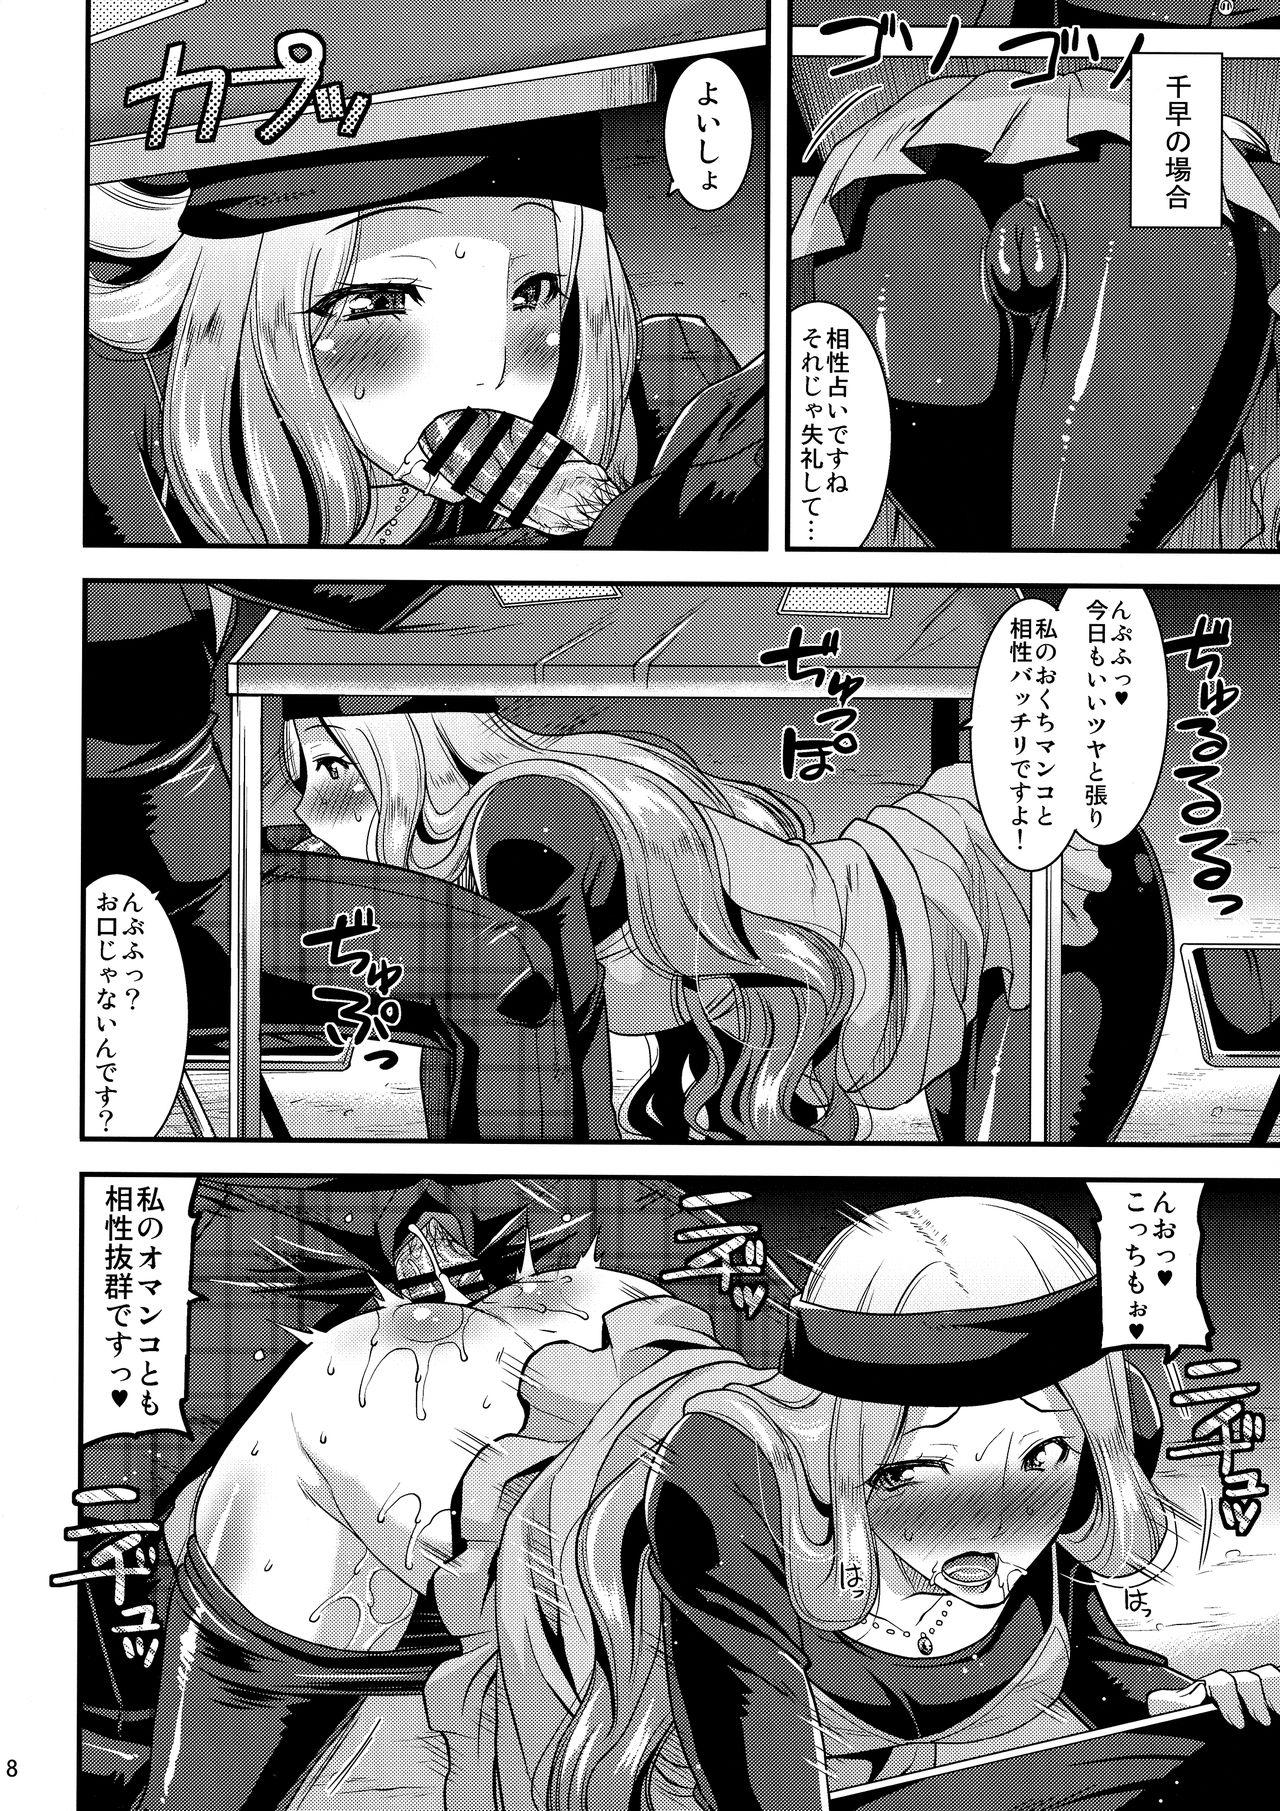 Hardcore Fucking LET US START THE SEX - Persona 5 Spooning - Page 7